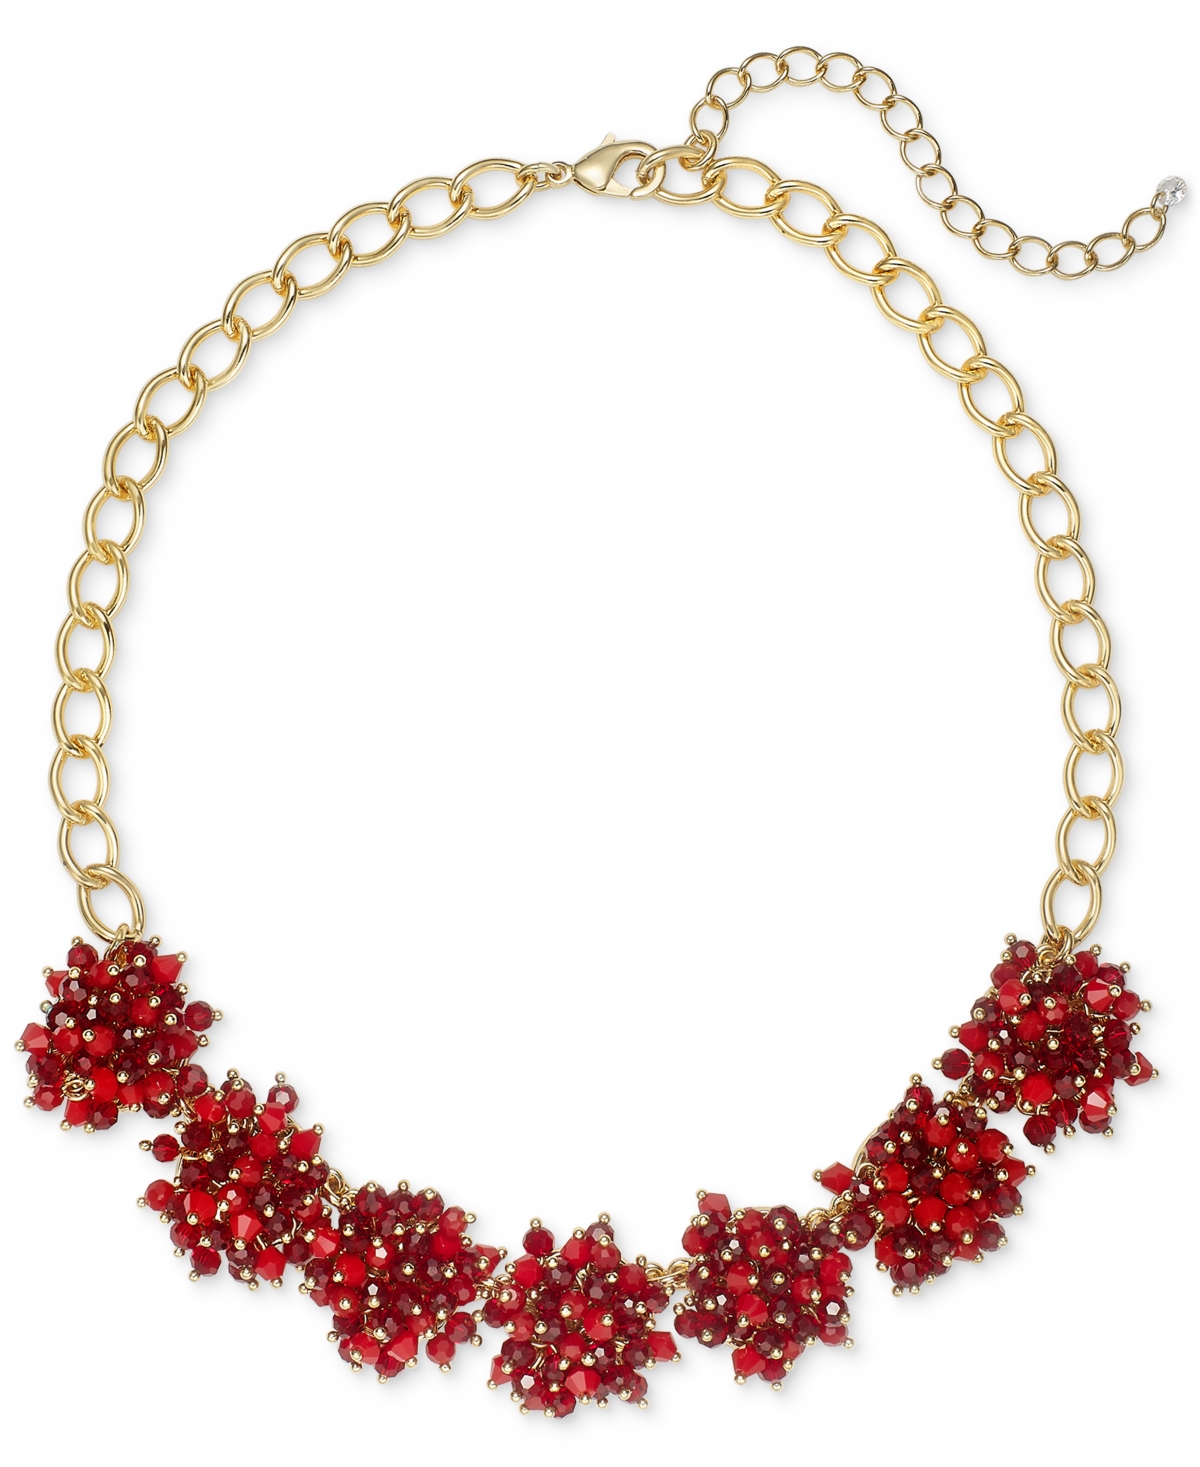 Gold-Tone Color Bead Cluster Statement Necklace, 17" + 3" extender, Created for Macy's - Multi